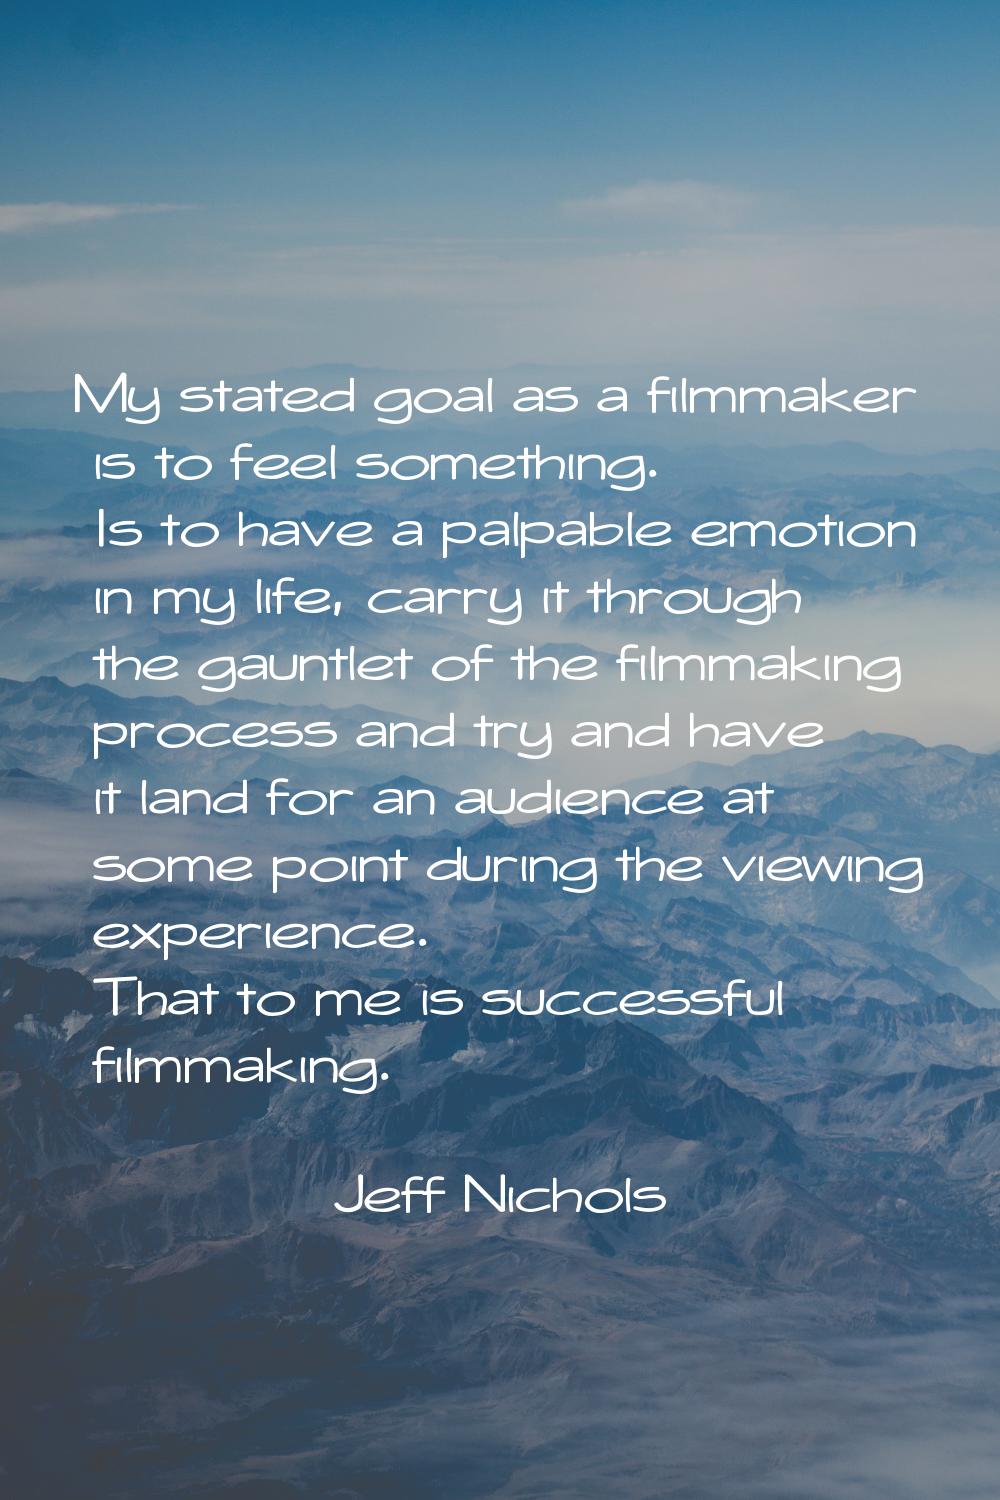 My stated goal as a filmmaker is to feel something. Is to have a palpable emotion in my life, carry